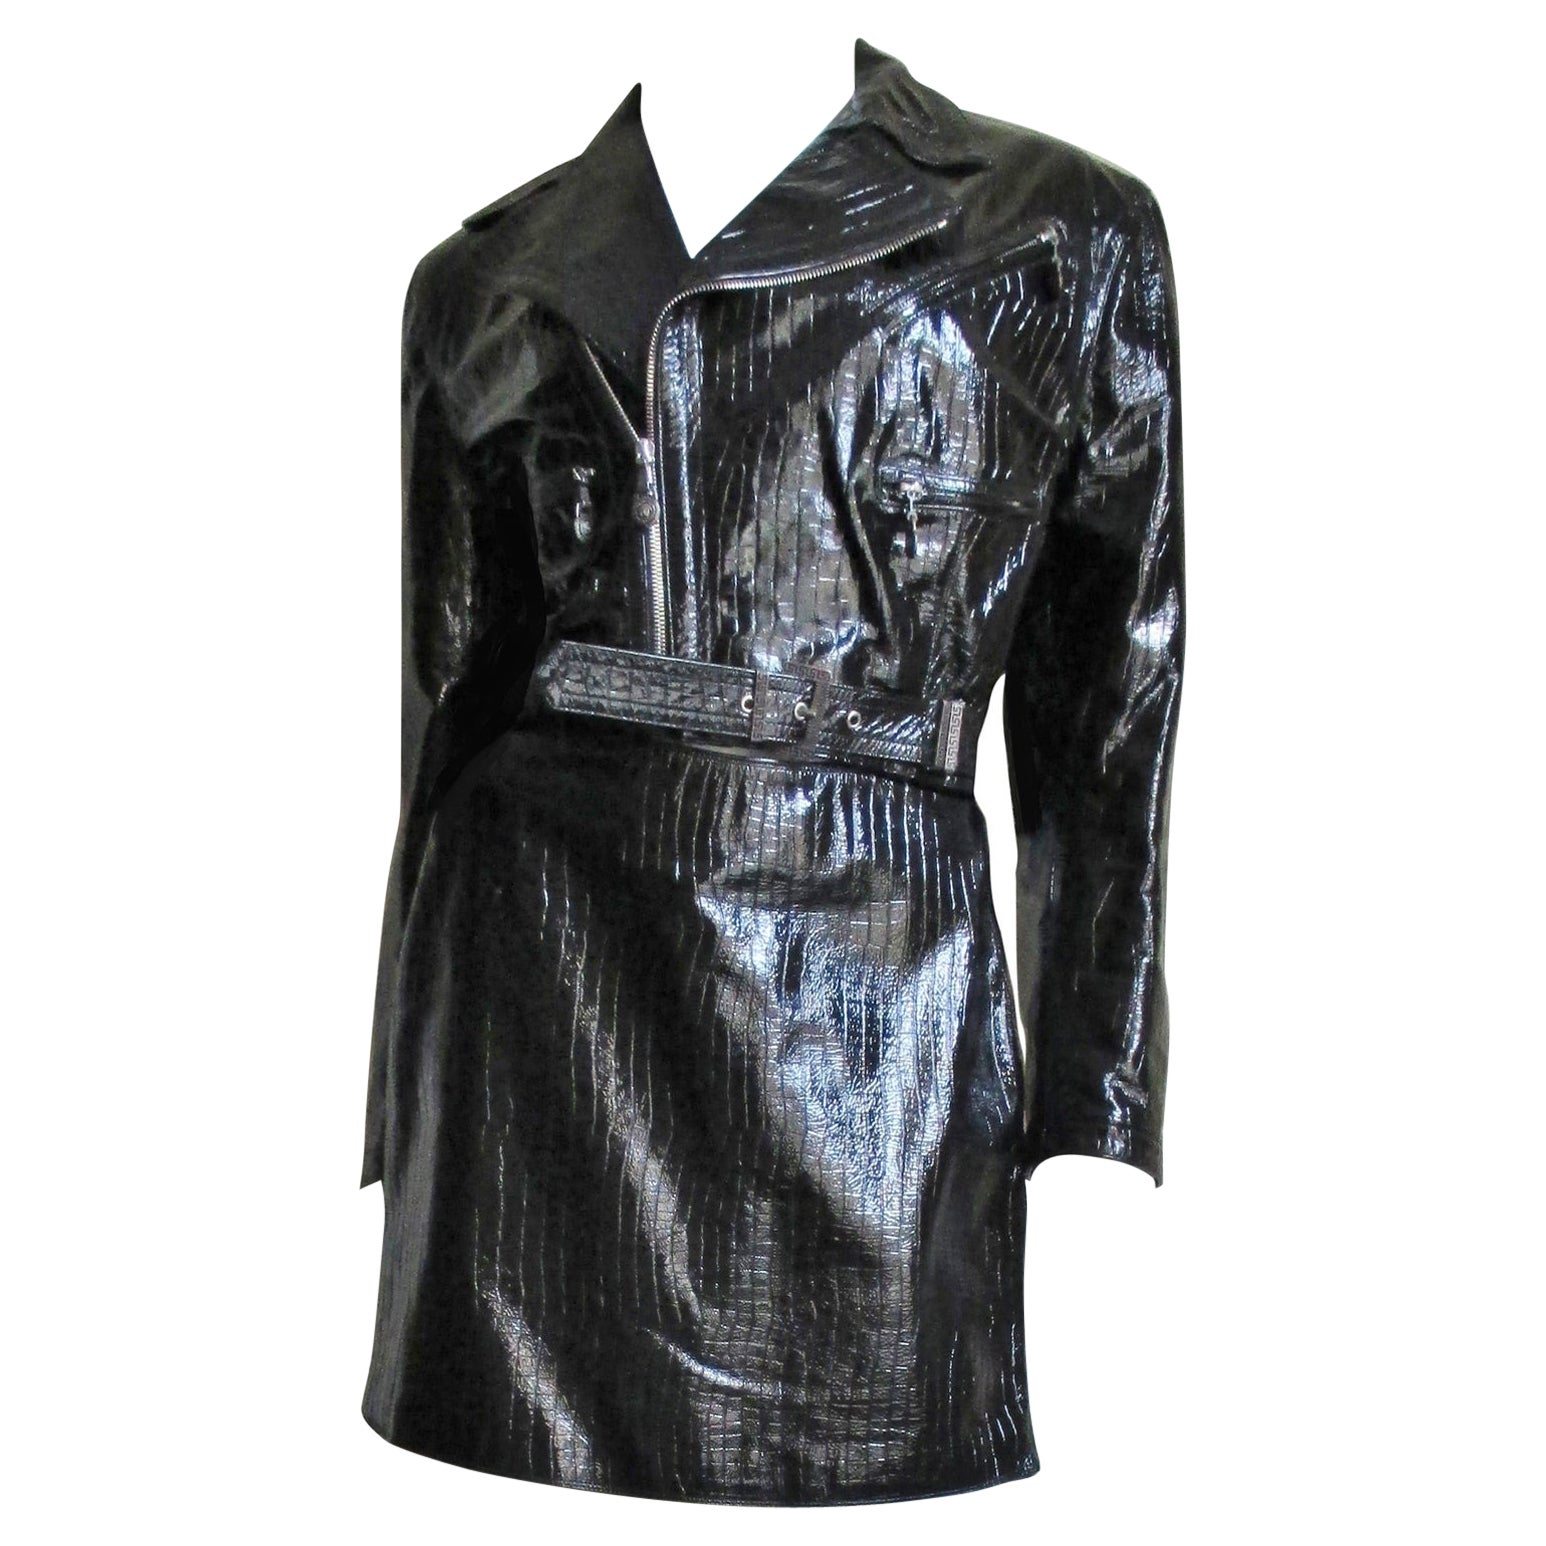 Gianni Versace Leather Motorcycle Jacket and Skirt A/W 1994 For Sale